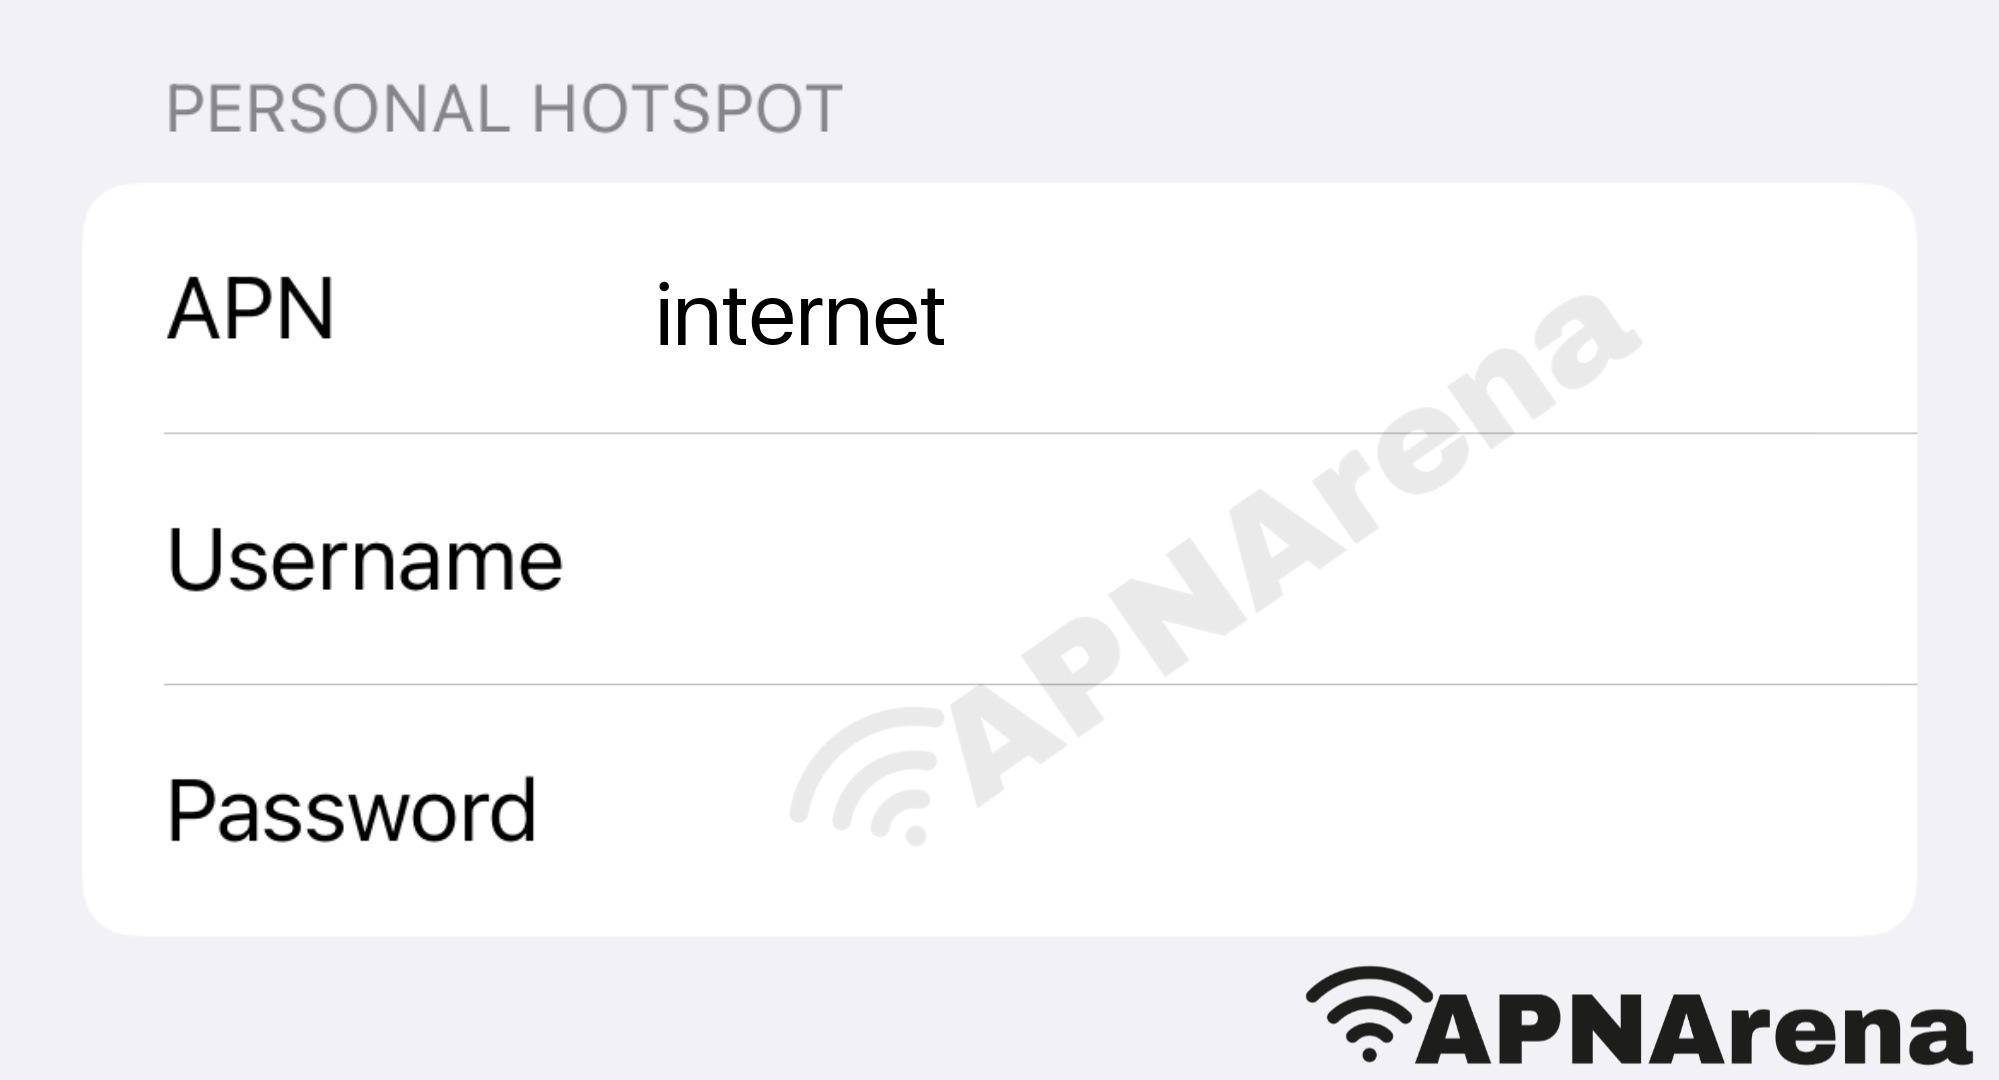 Kiss Mobile Personal Hotspot Settings for iPhone